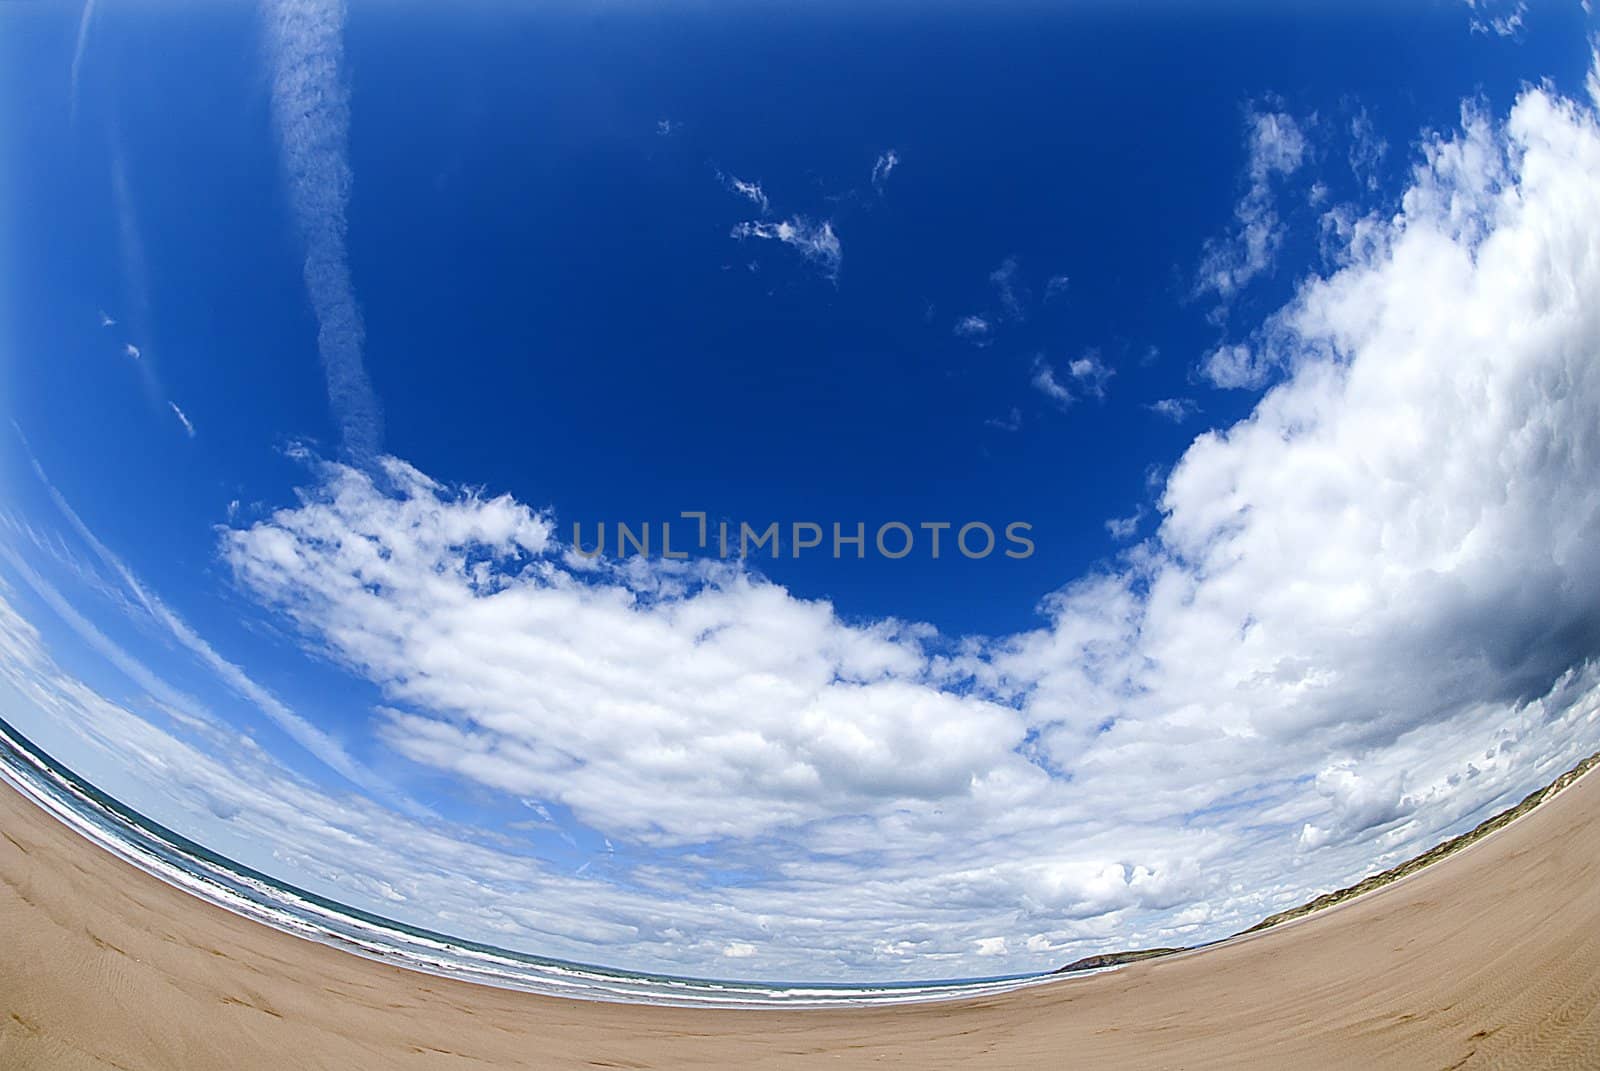 wide empty beach gower wales with blue skies and white clouds by itsrich